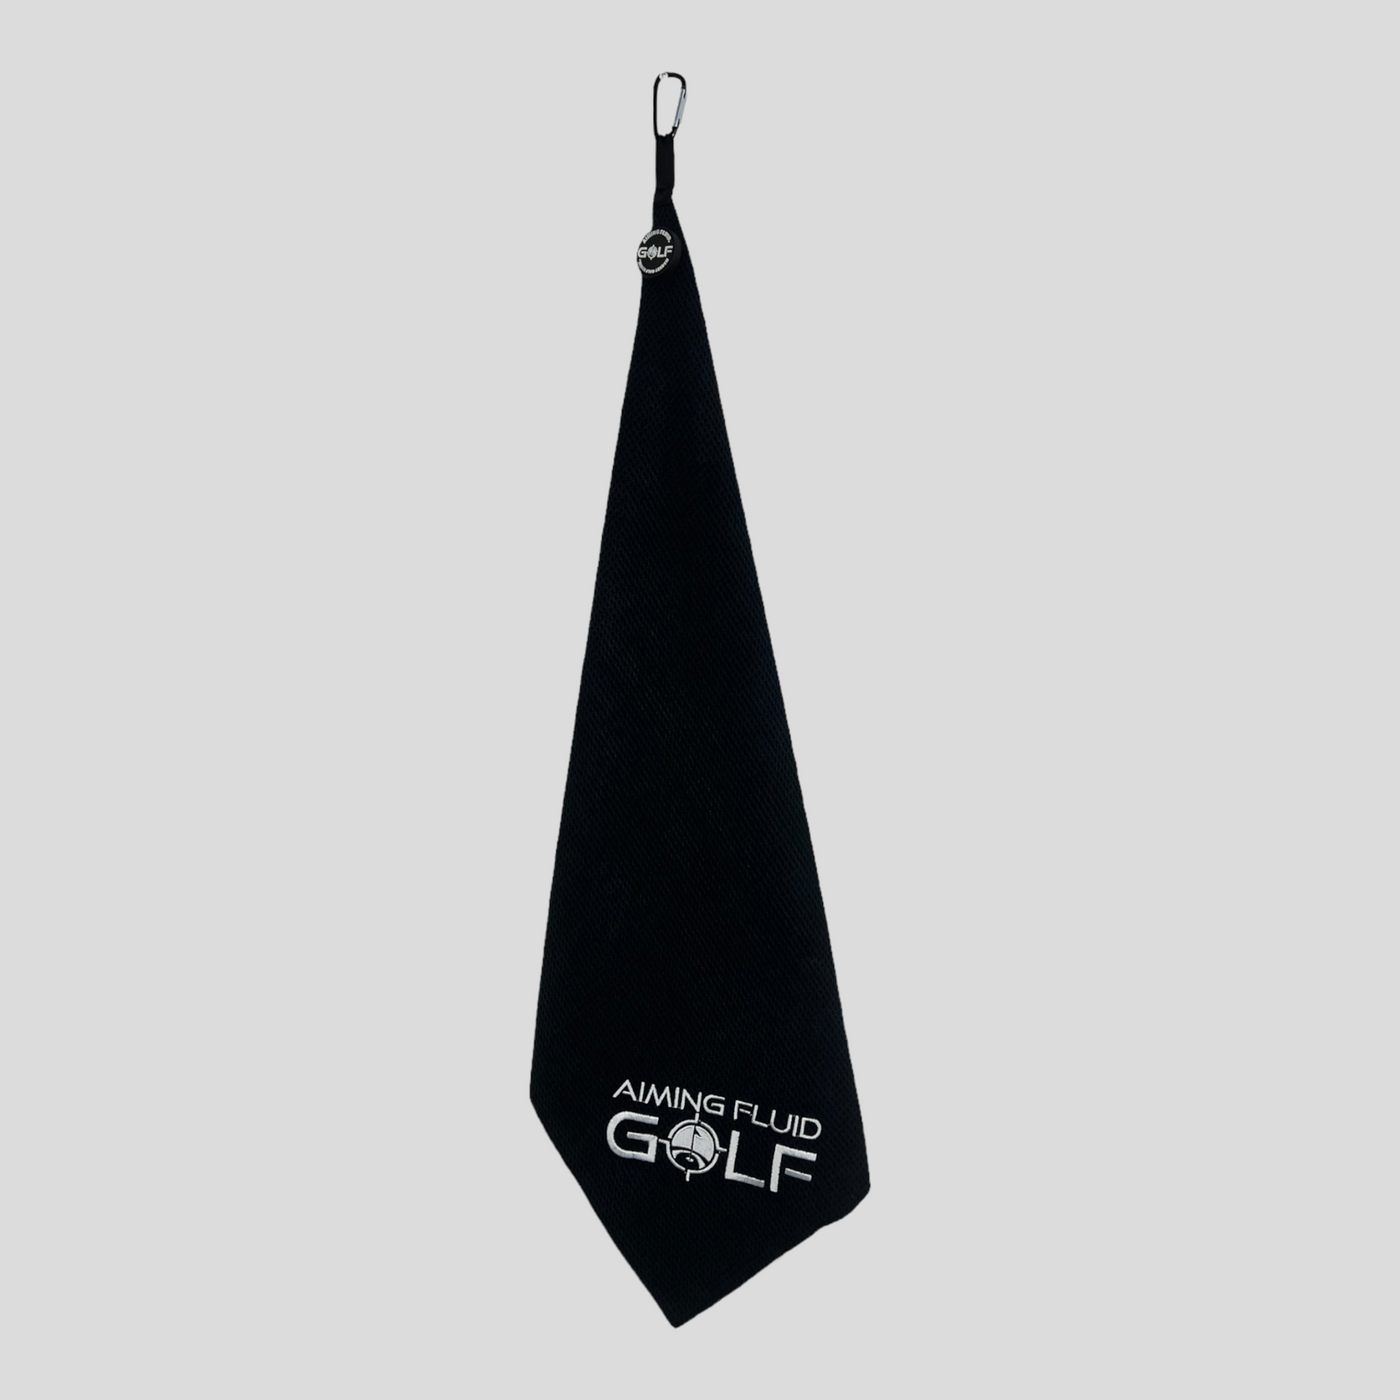 Aiming Fluid Golf (THE BEST TOWEL IN GOLF) Magnetic Towel Tall Boy (Large) in color black